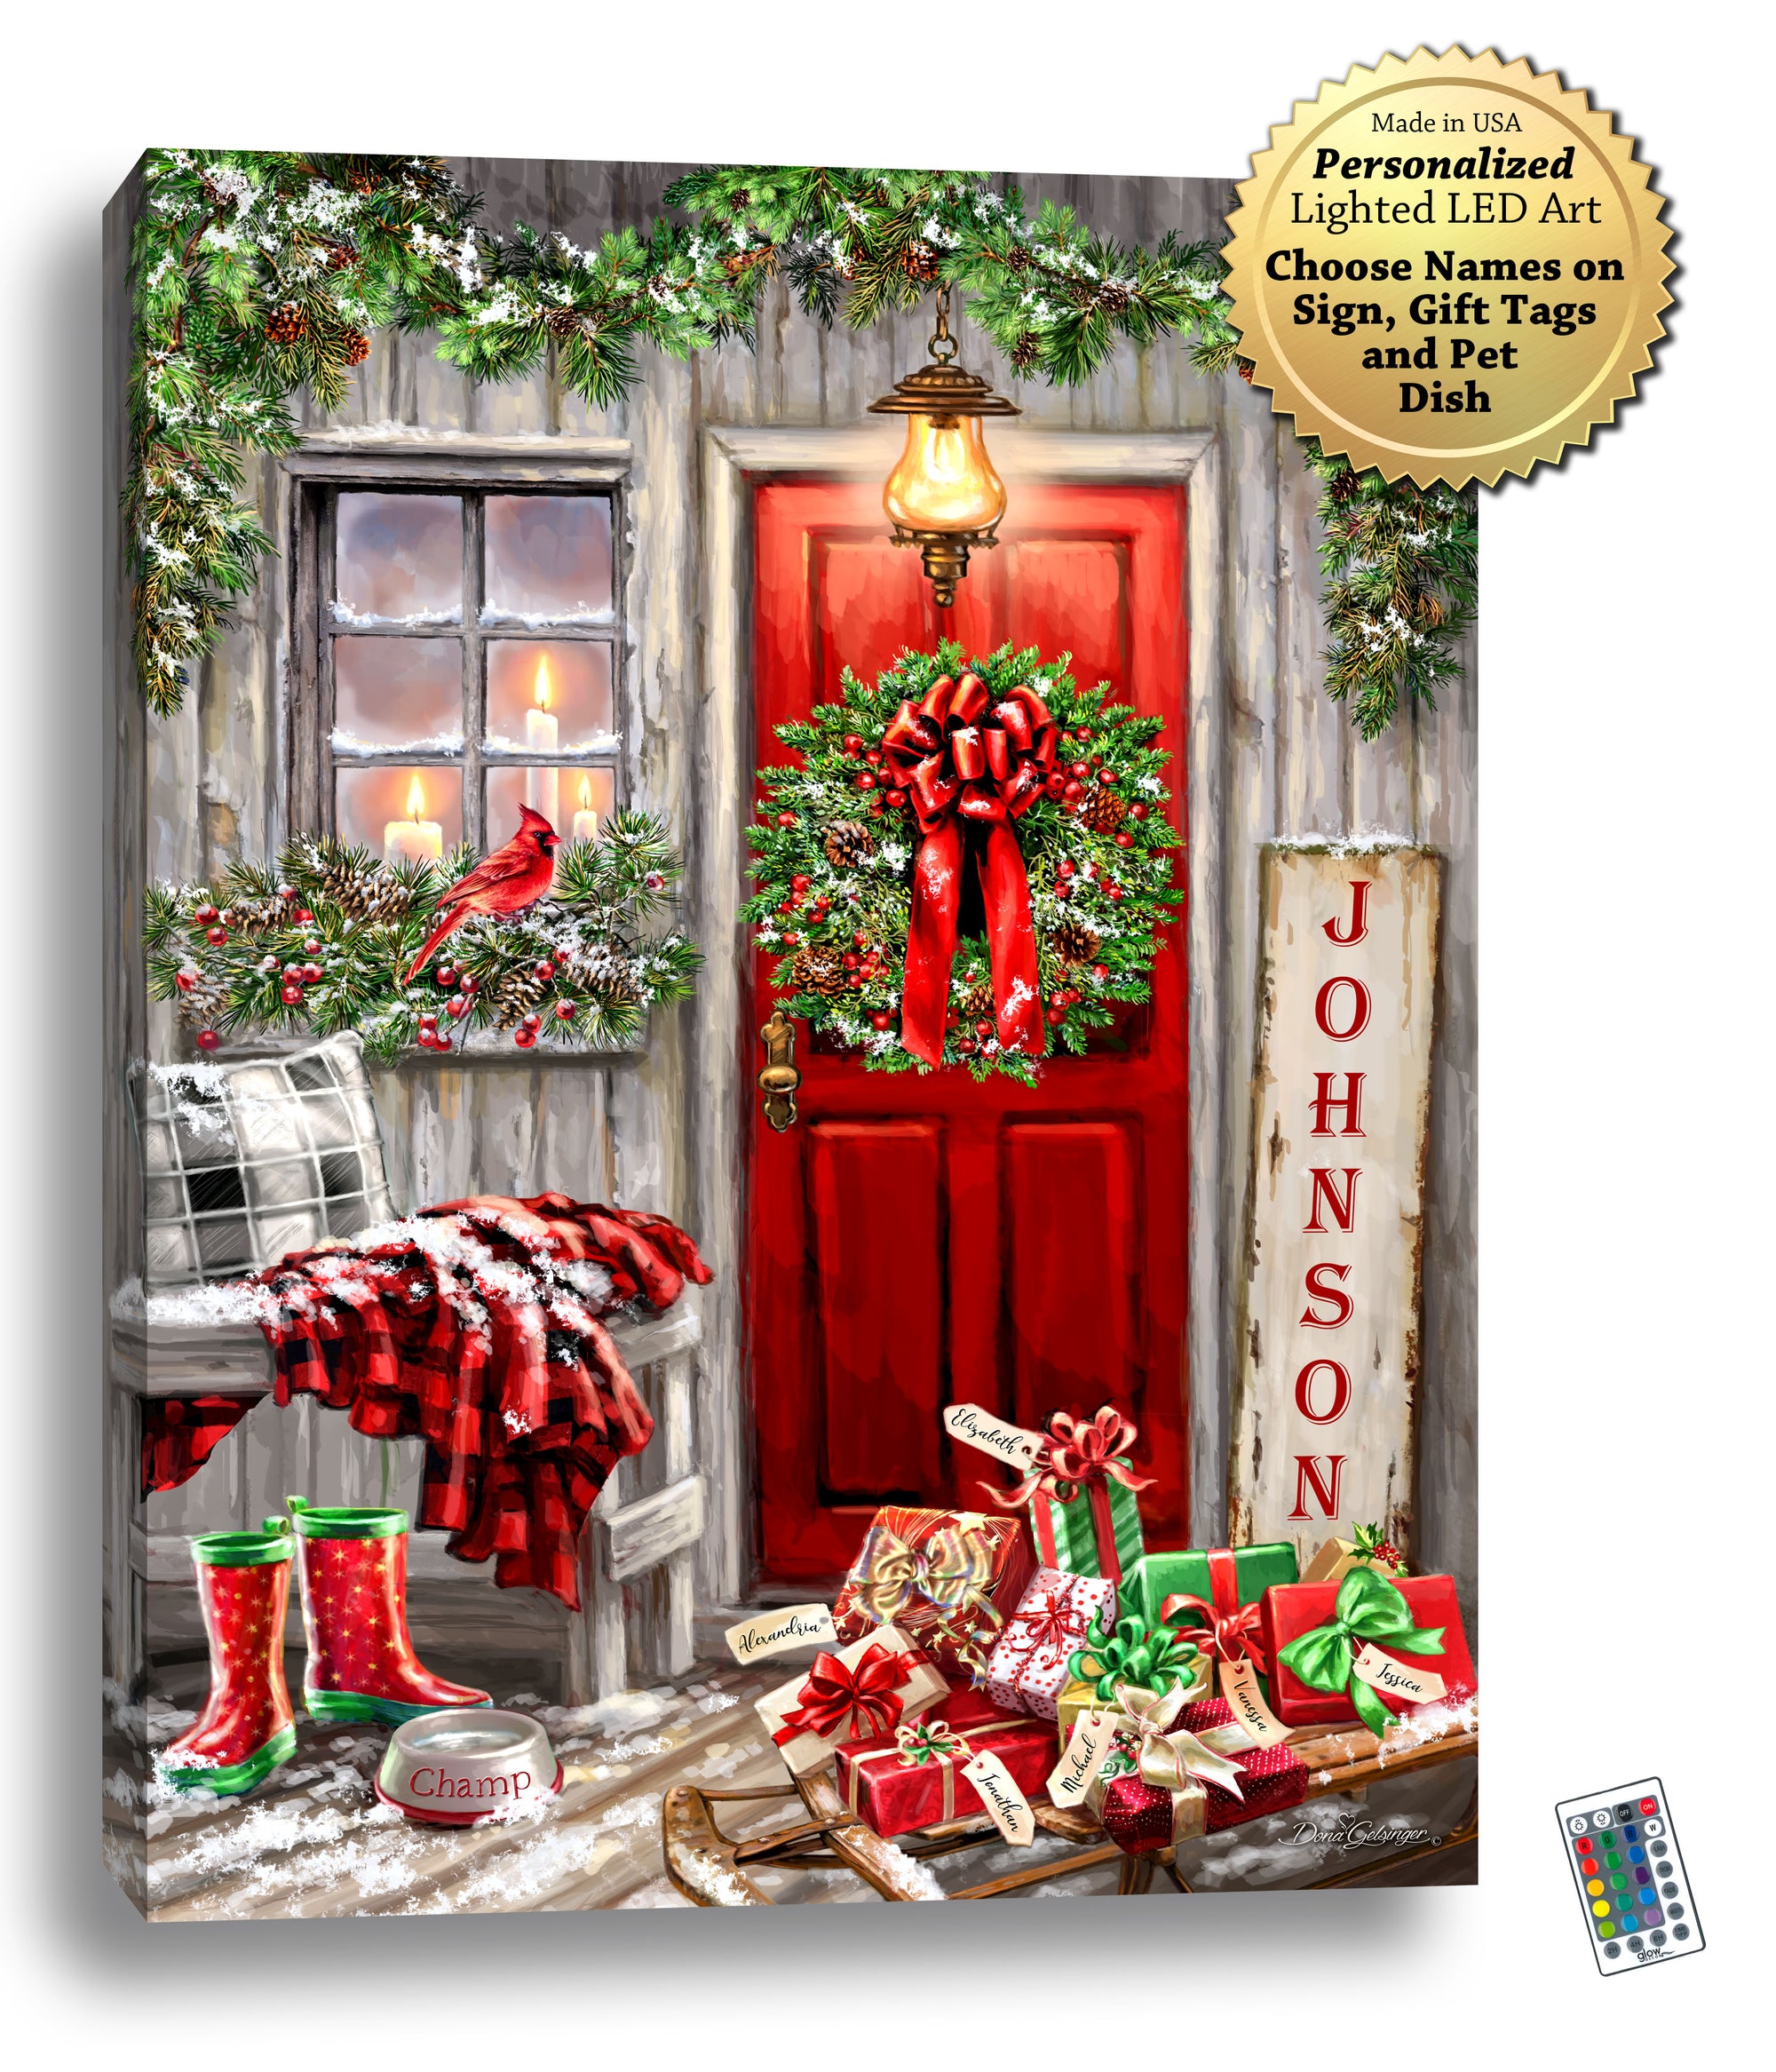  a bright red door adorned with a festive wreath and bow. On one side of the door, a wooden sign and sled topped with lots of presents are waiting to be opened. On the other side of the door, a bench with a cozy blanket and pillow offers a perfect spot to relax and enjoy the holiday spirit. Under the bench, a pair of rain boots and a dog water bowl.